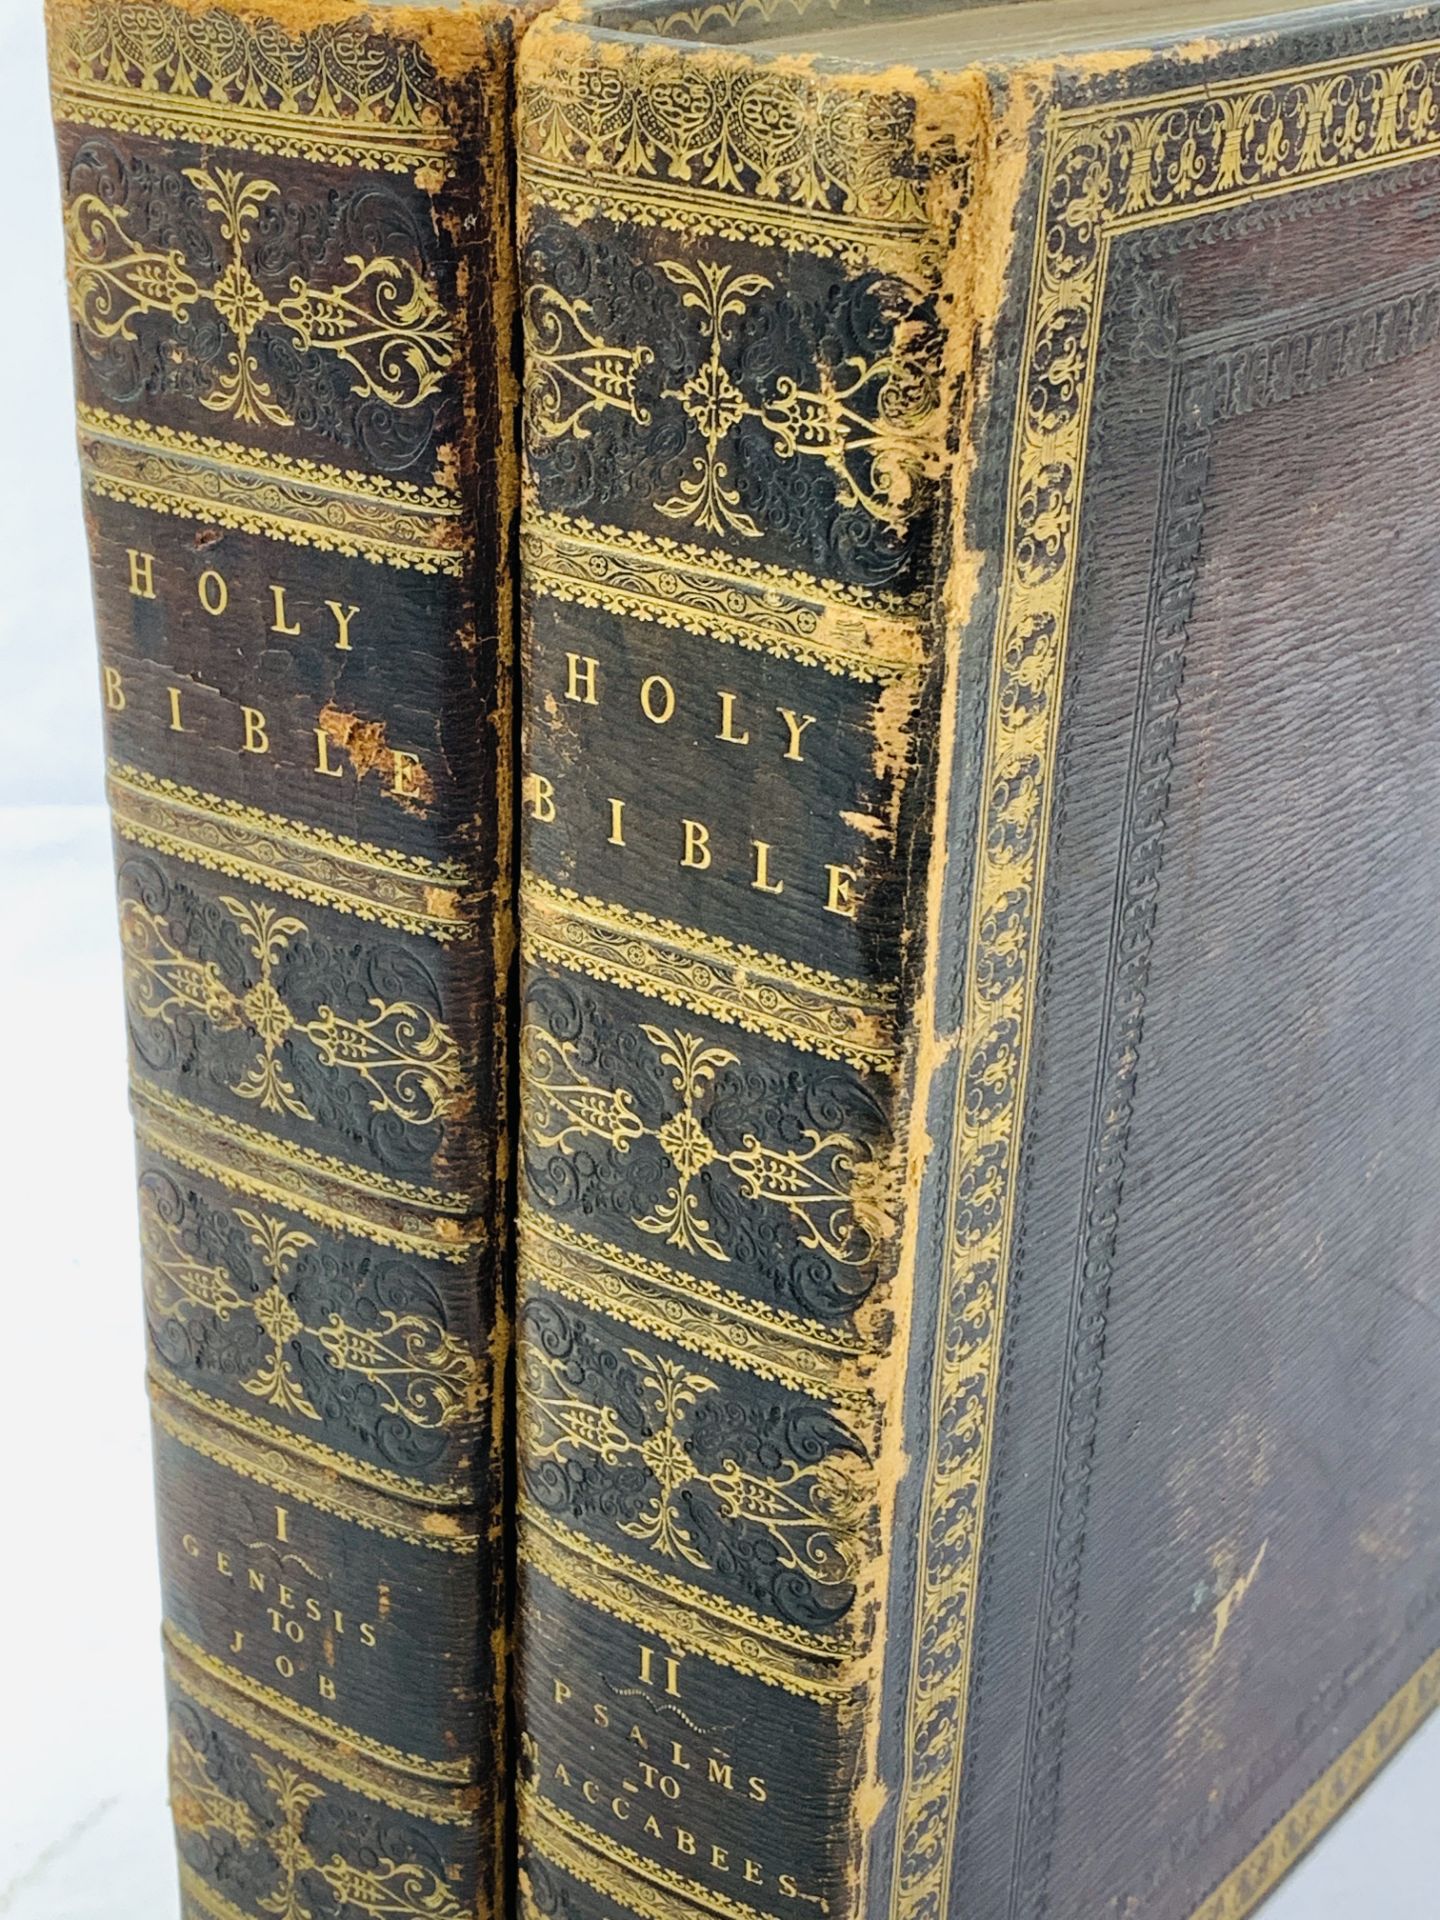 Holy Bible, published 1817, volume 1 and volume 1 part 2, bound in gilt decorated leather - Image 2 of 5